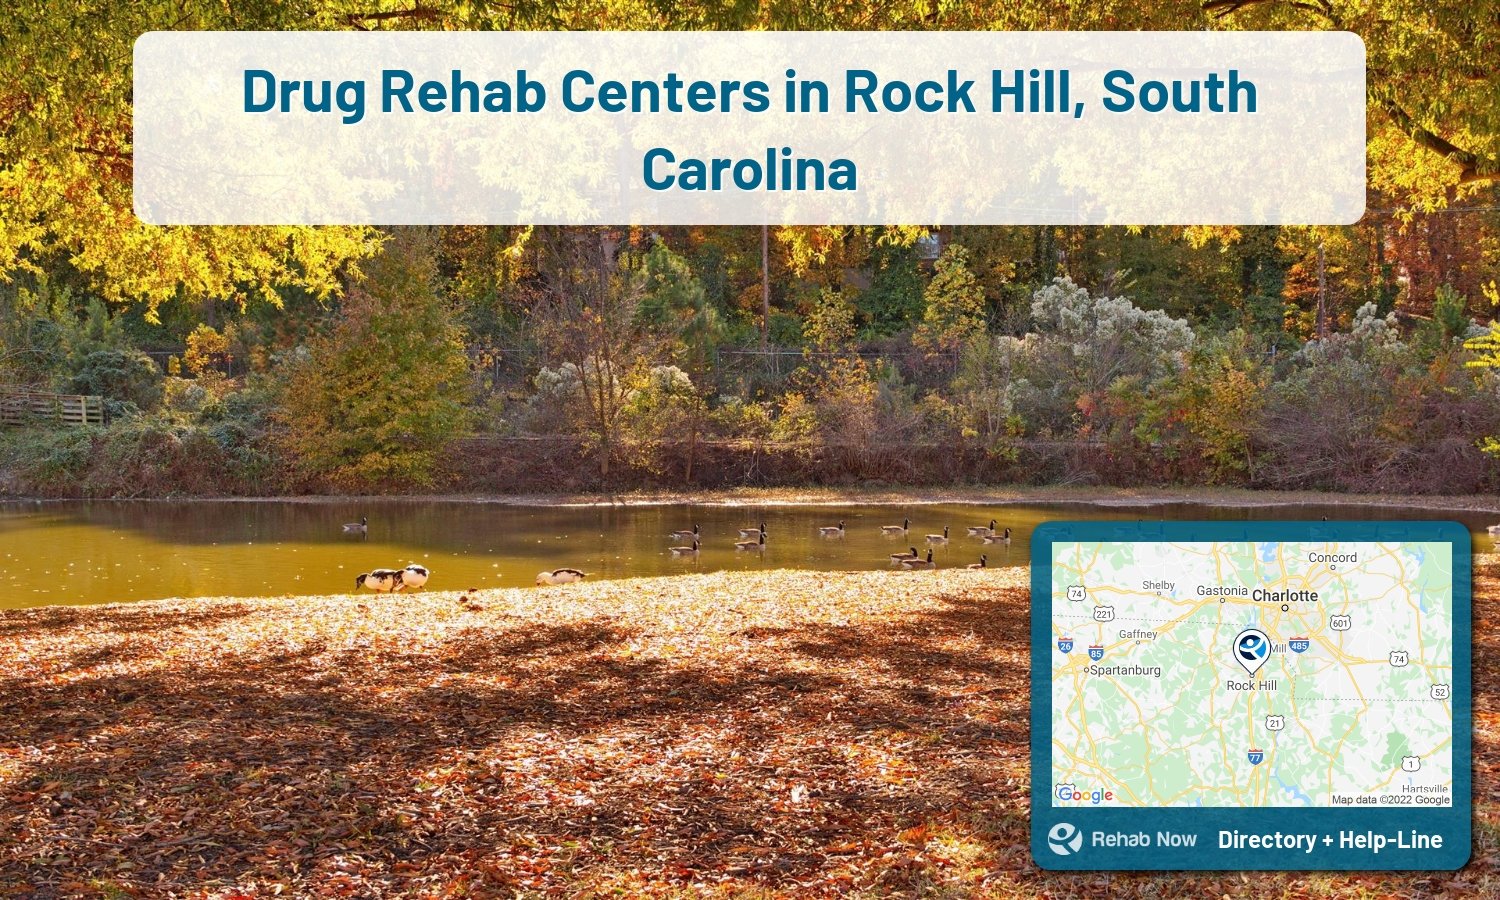 Rock Hill, SC Treatment Centers. Find drug rehab in Rock Hill, South Carolina, or detox and treatment programs. Get the right help now!